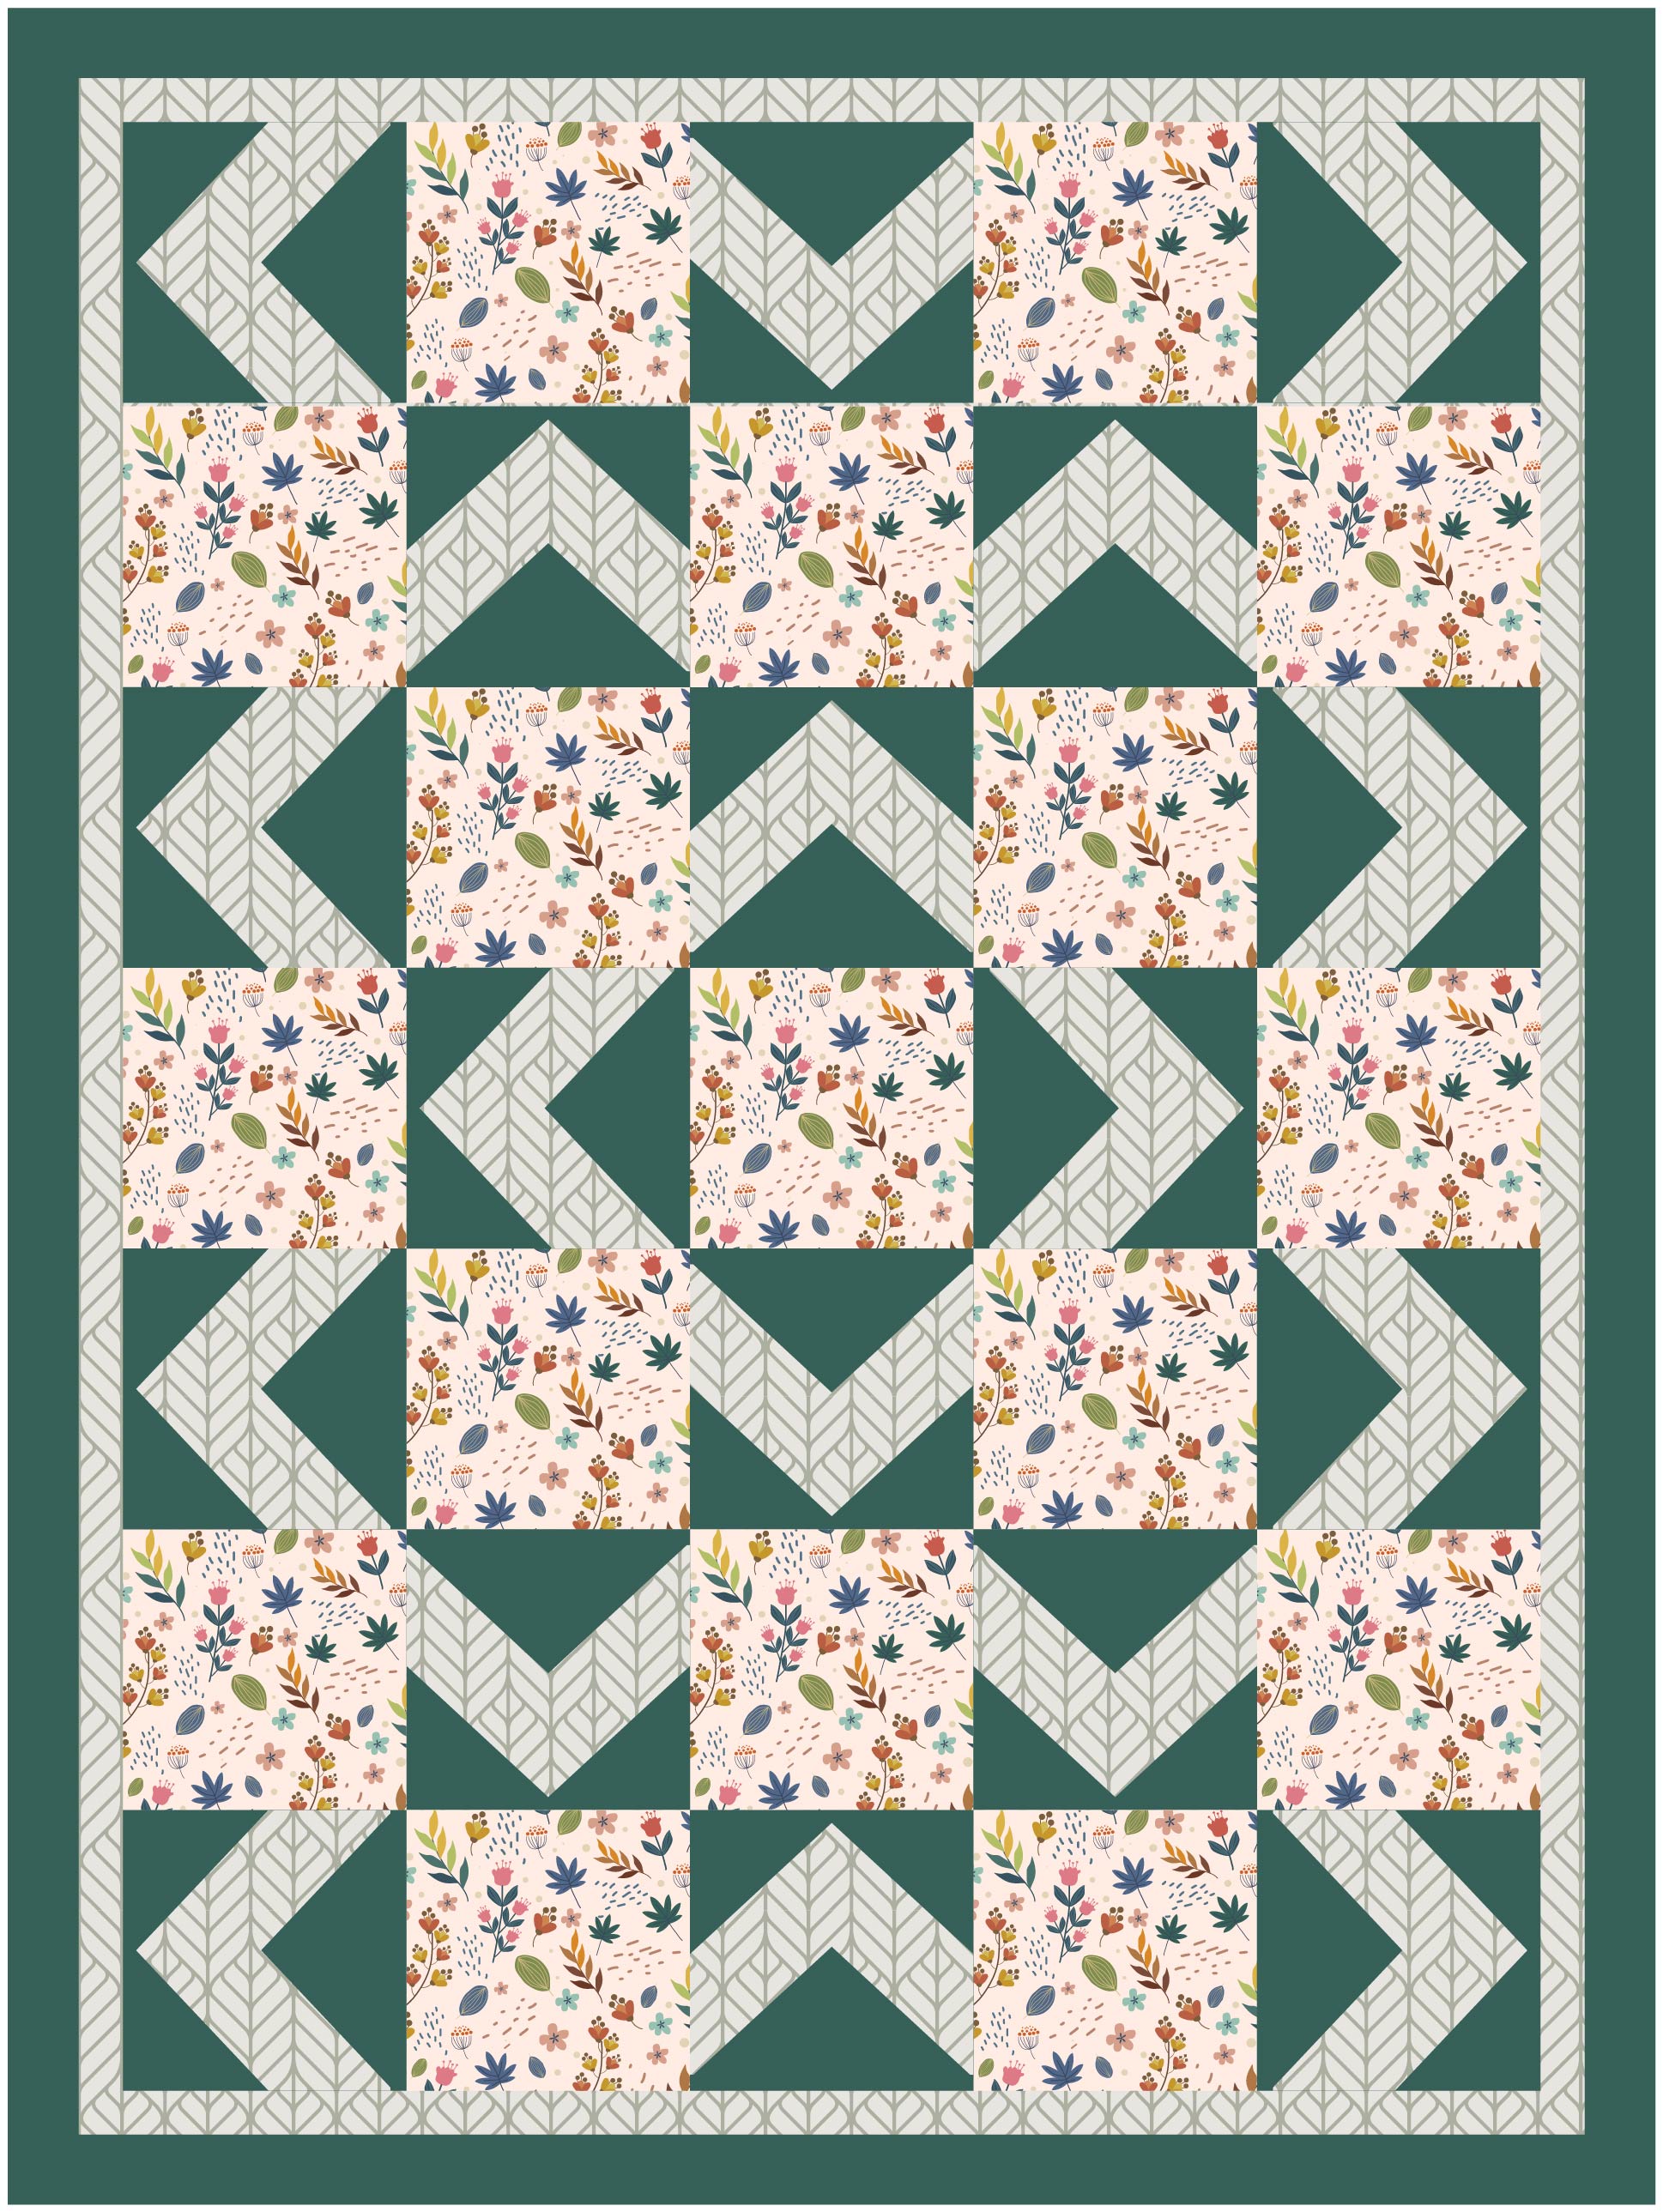 Printable Easy Quilt Patterns For Beginners